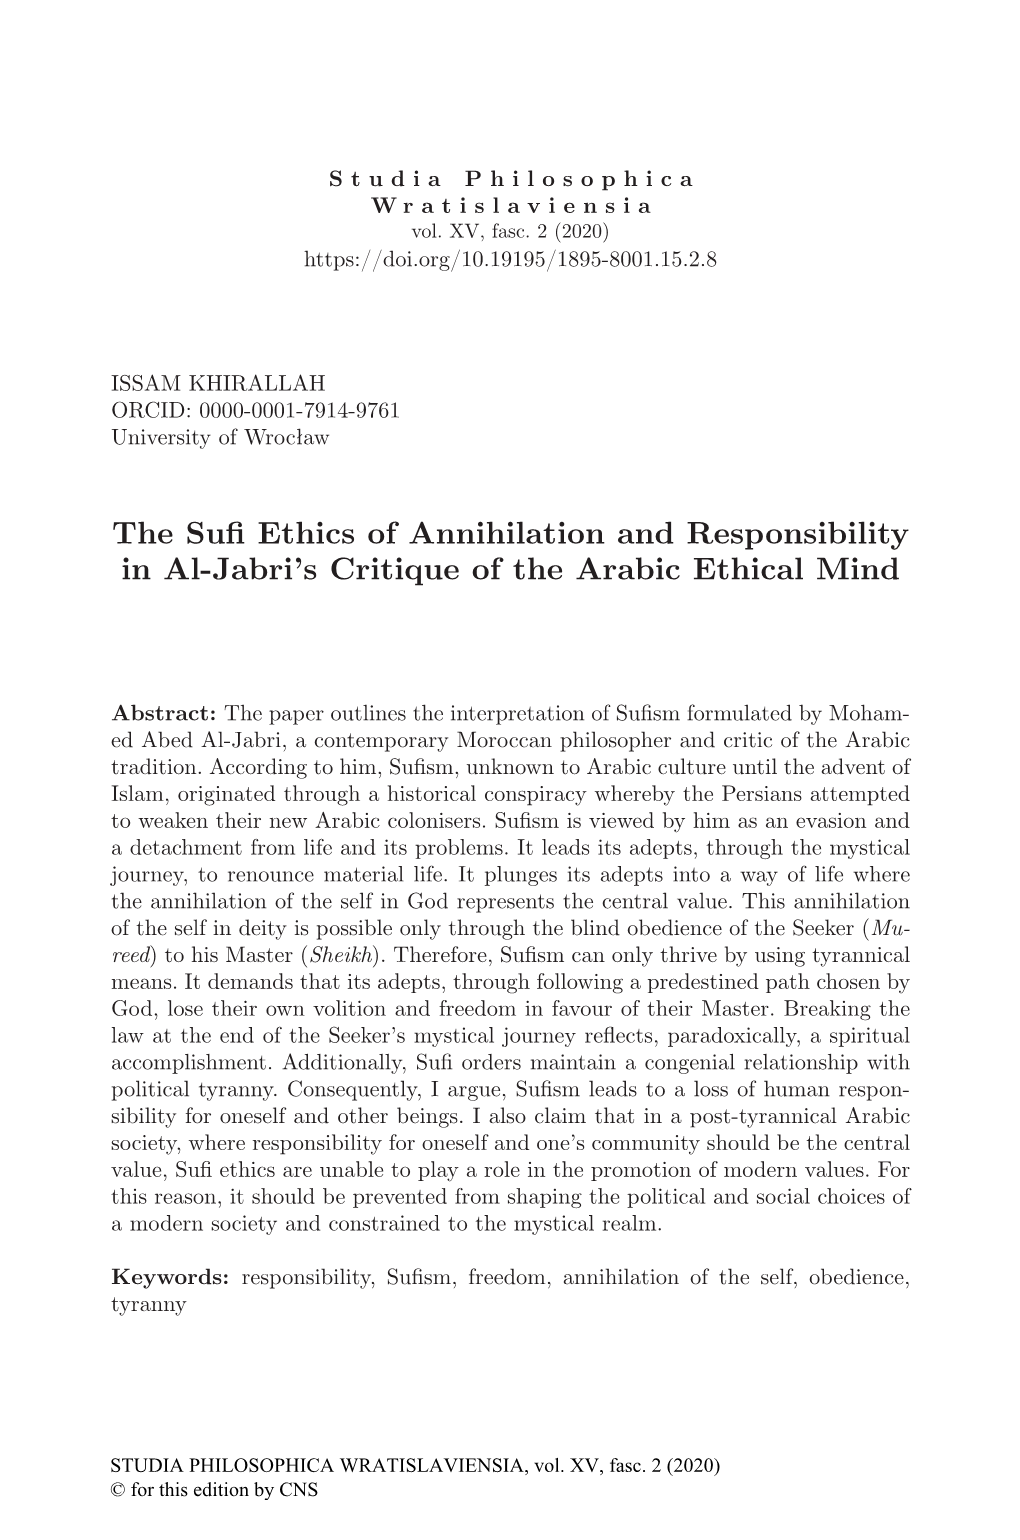 The Sufi Ethics of Annihilation and Responsibility in Al-Jabri's Critique of the Arabic Ethical Mind